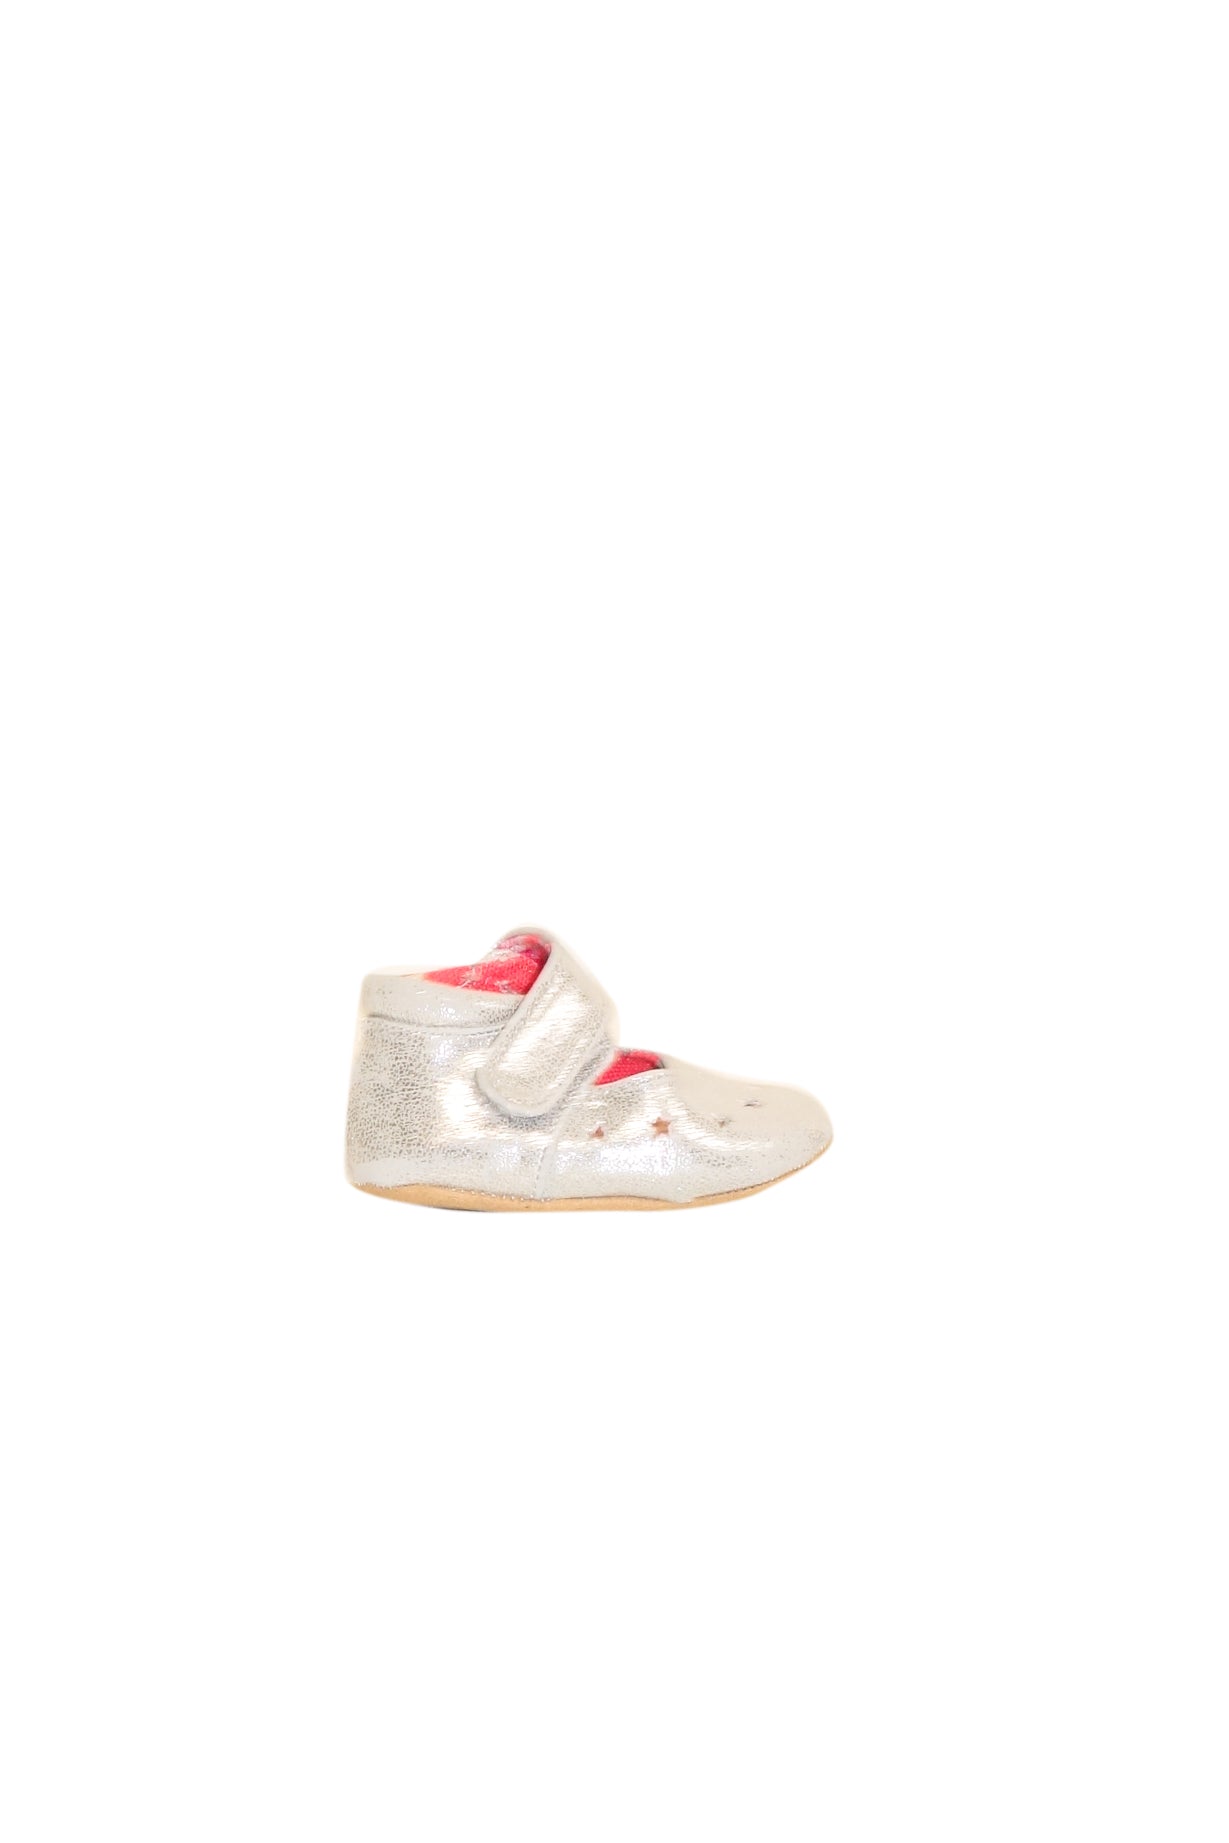 cath kidston baby shoes